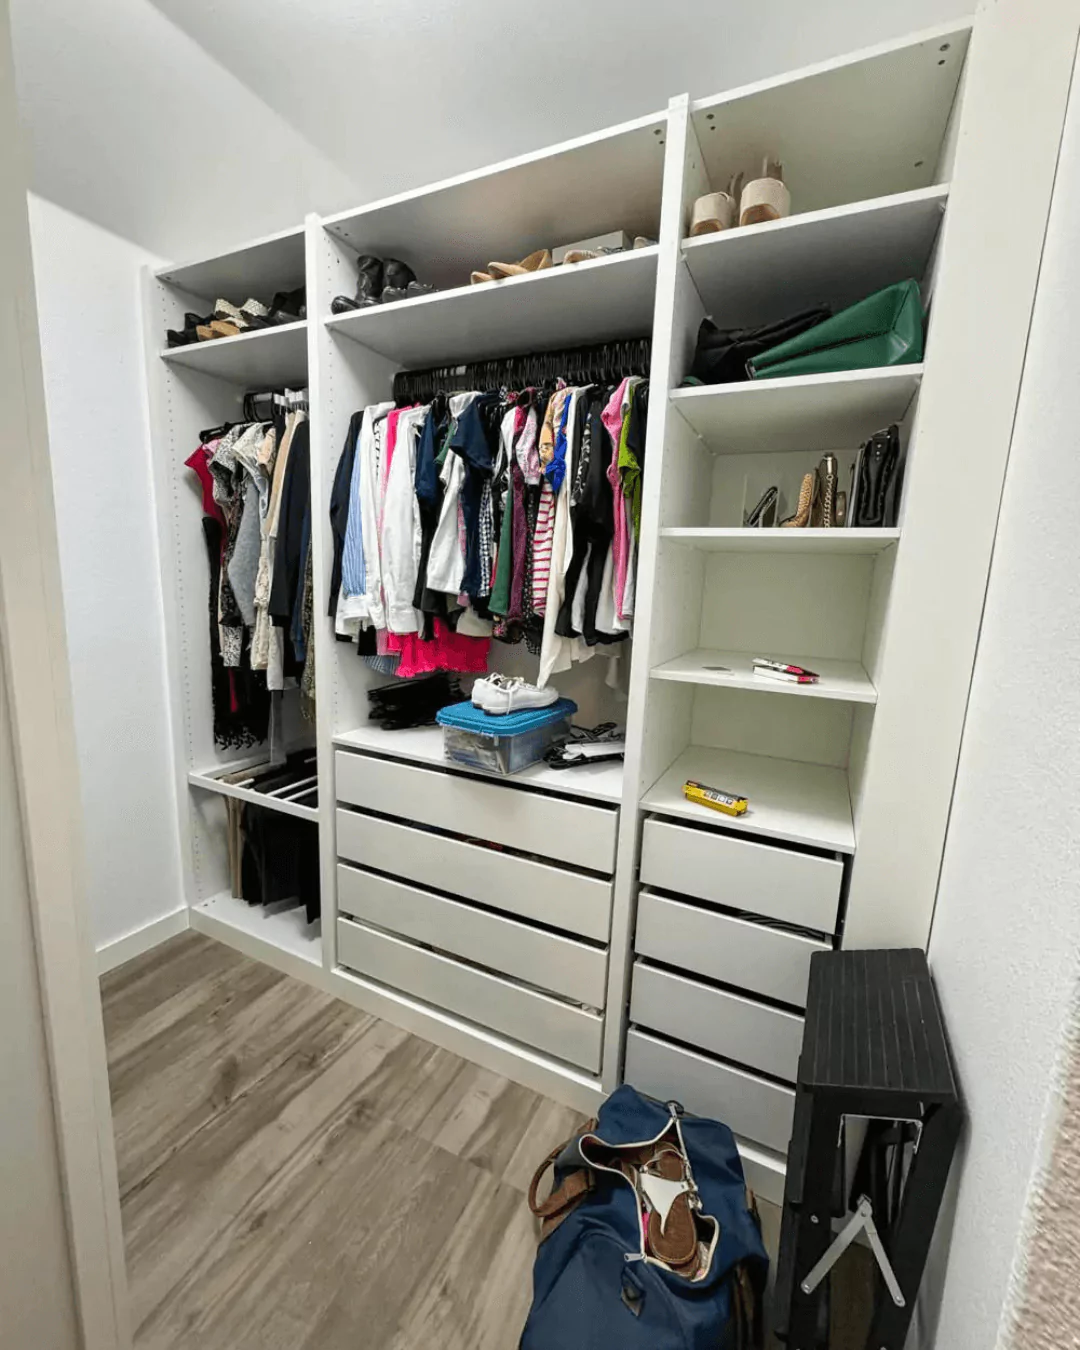 Our DIY Ikea PAX Built-in Closet Makeover